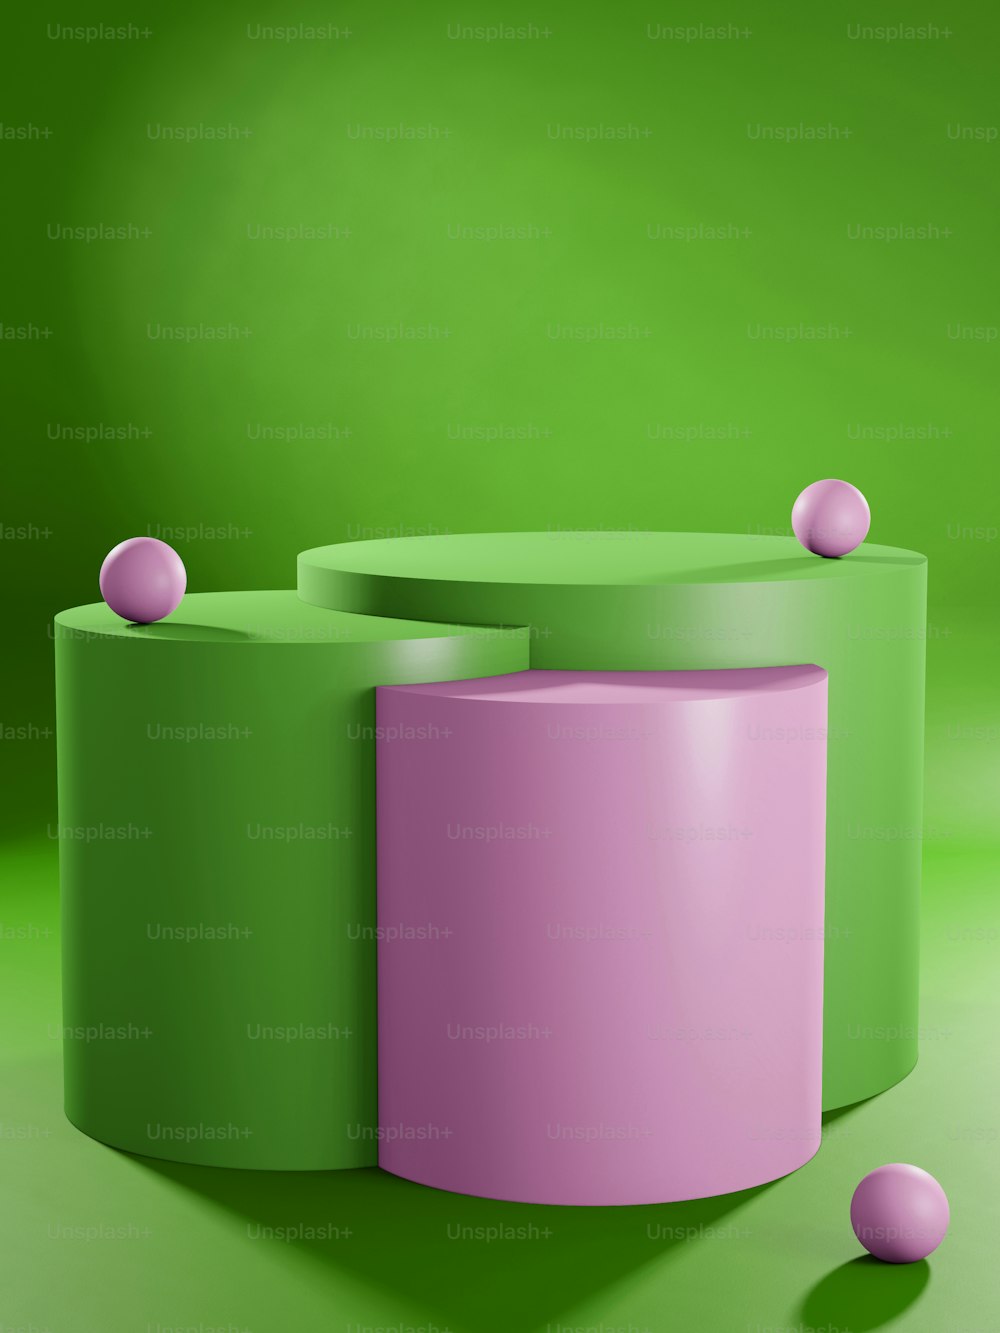 a green and pink object on a green background